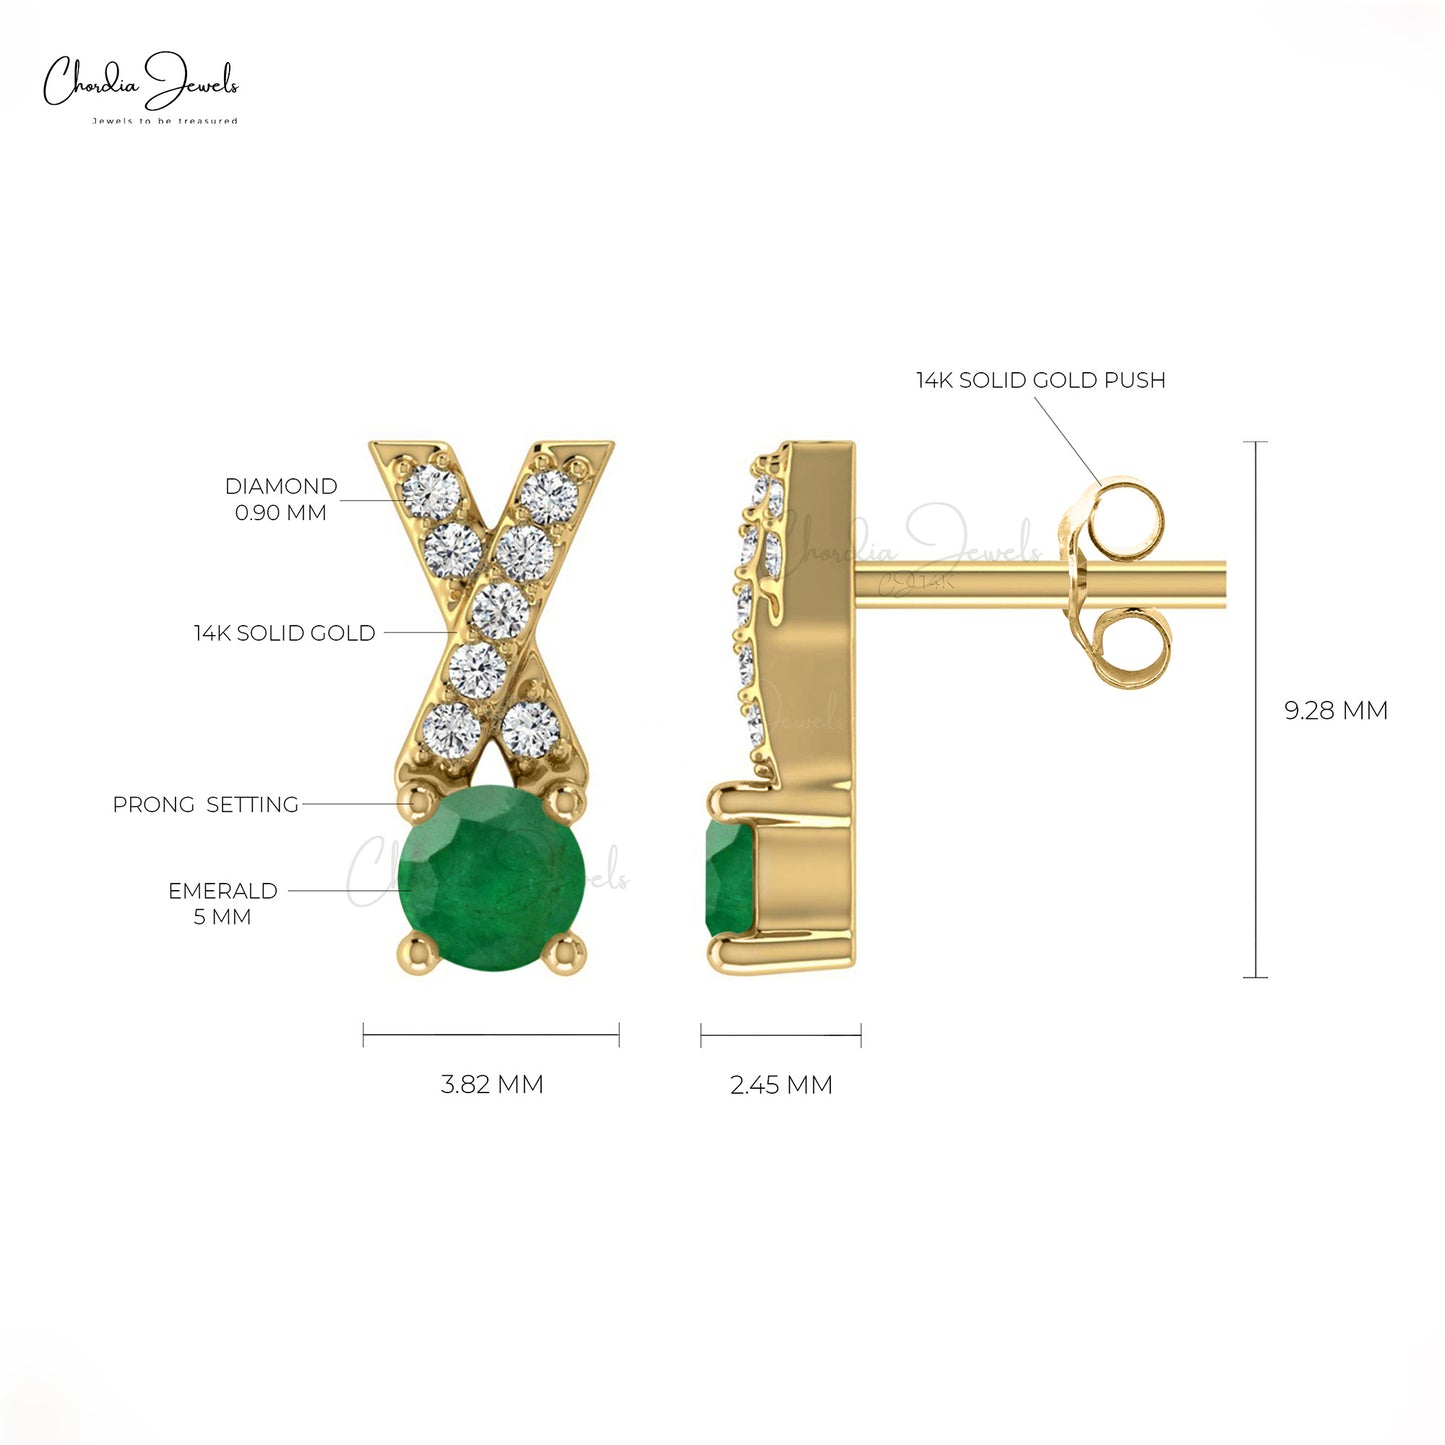 Make a lasting impression with these emerald diamond earrings